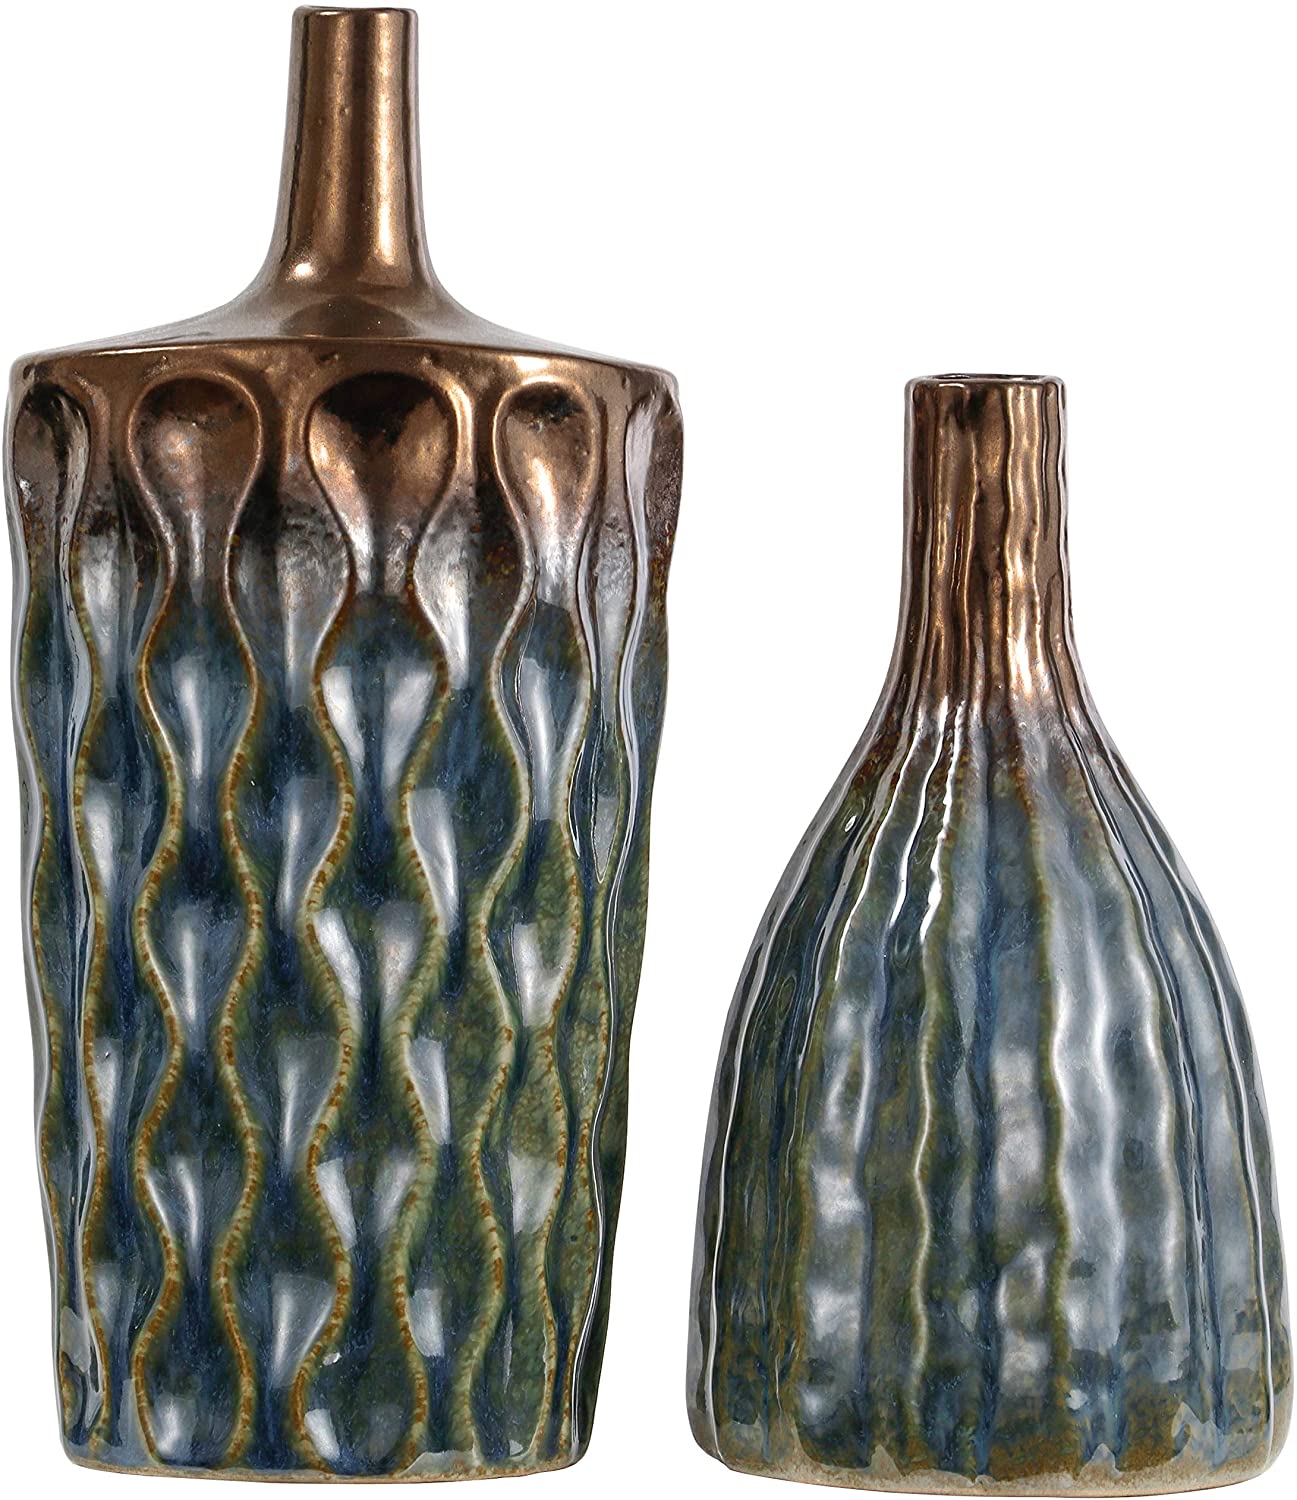 Modern Luxury  Blue Ceramic Vases Set of 2, Reactive Glazed Geometric Decorative Vases for Home Decor, Mantel, Table, Living Room, Shelf Decorations, 12 inch - Home Decor Gifts and More